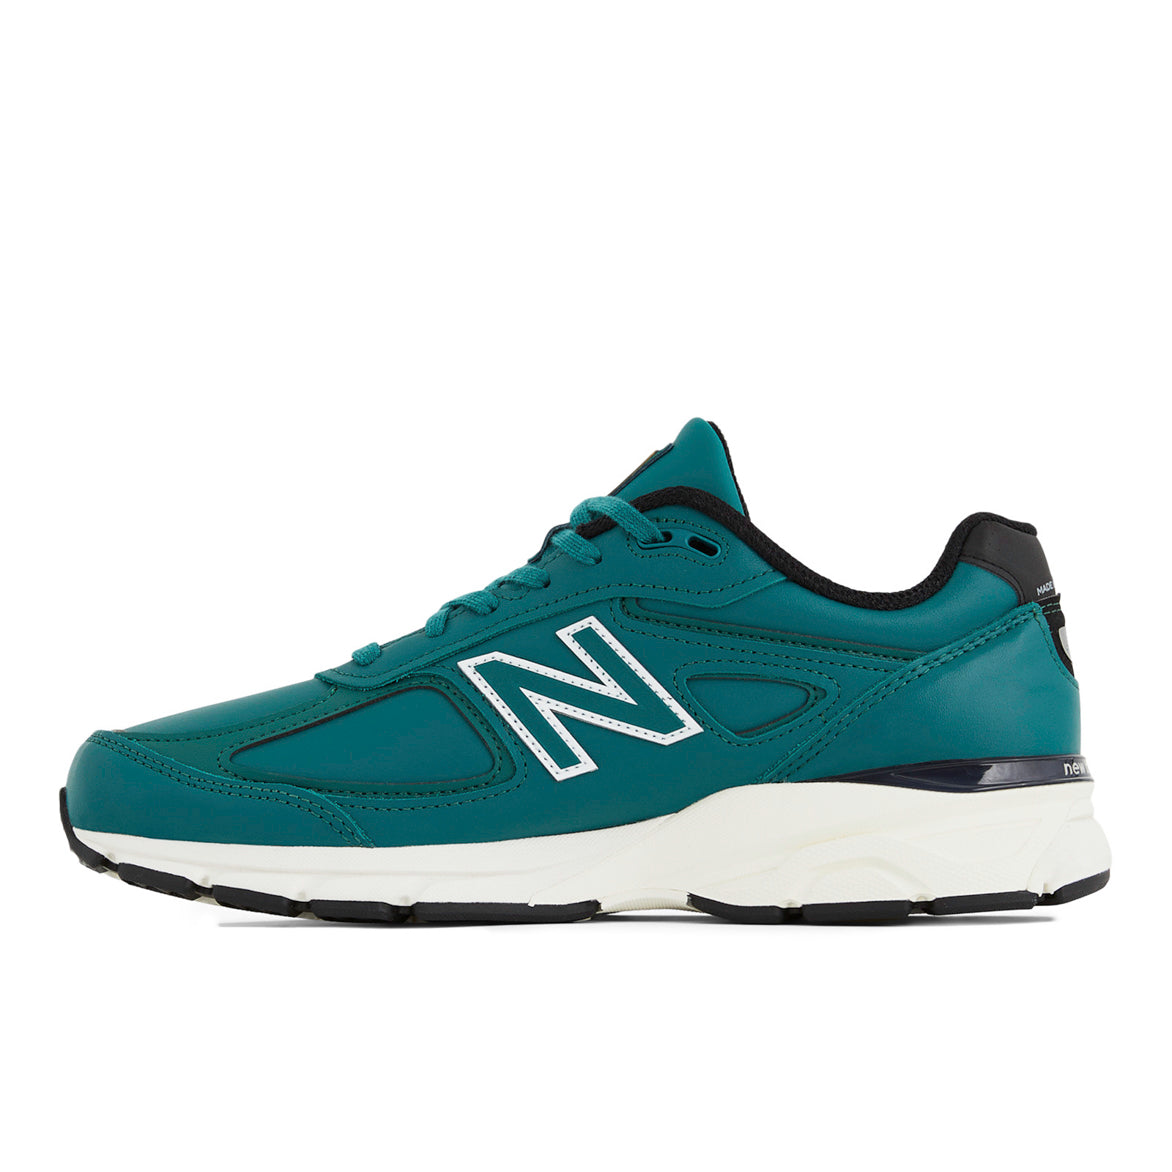 MADE IN THE USA 990V4 "TEAL"